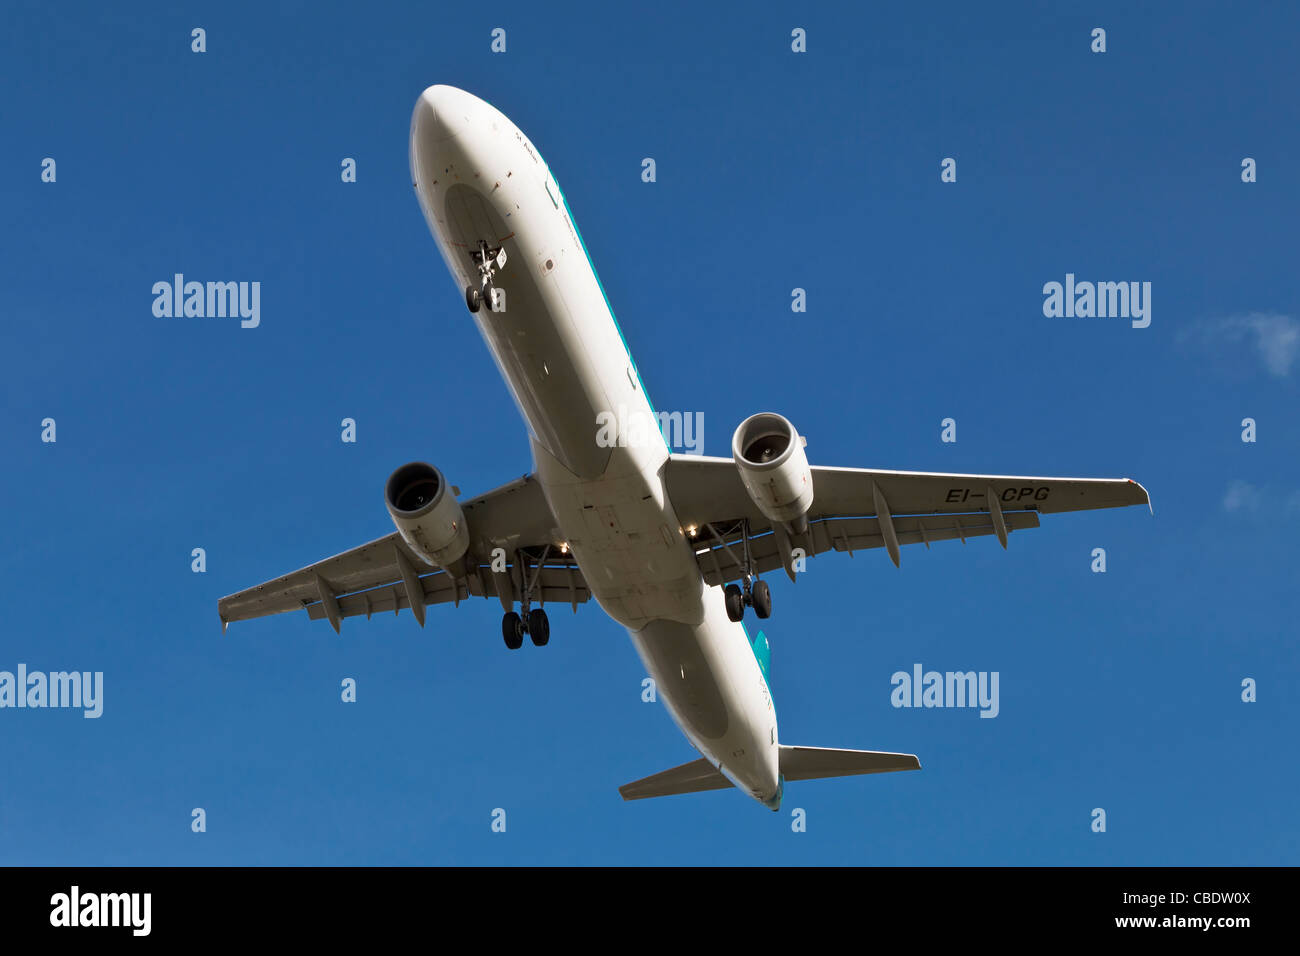 An Airbus A321 of the Irish airline Aer Lingus Stock Photo